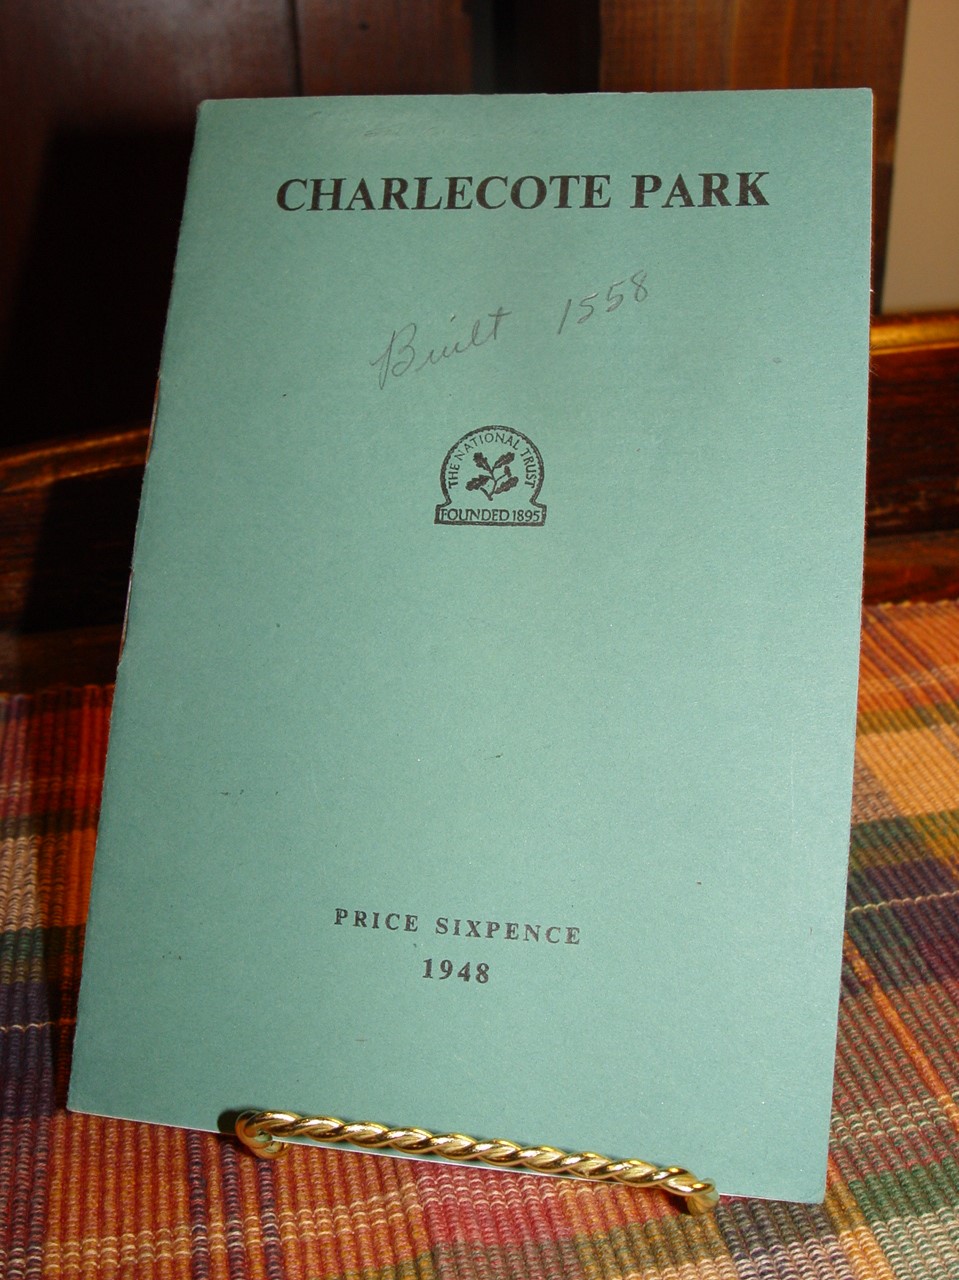 1948 Charlecote Park Tourist Guide Booklet